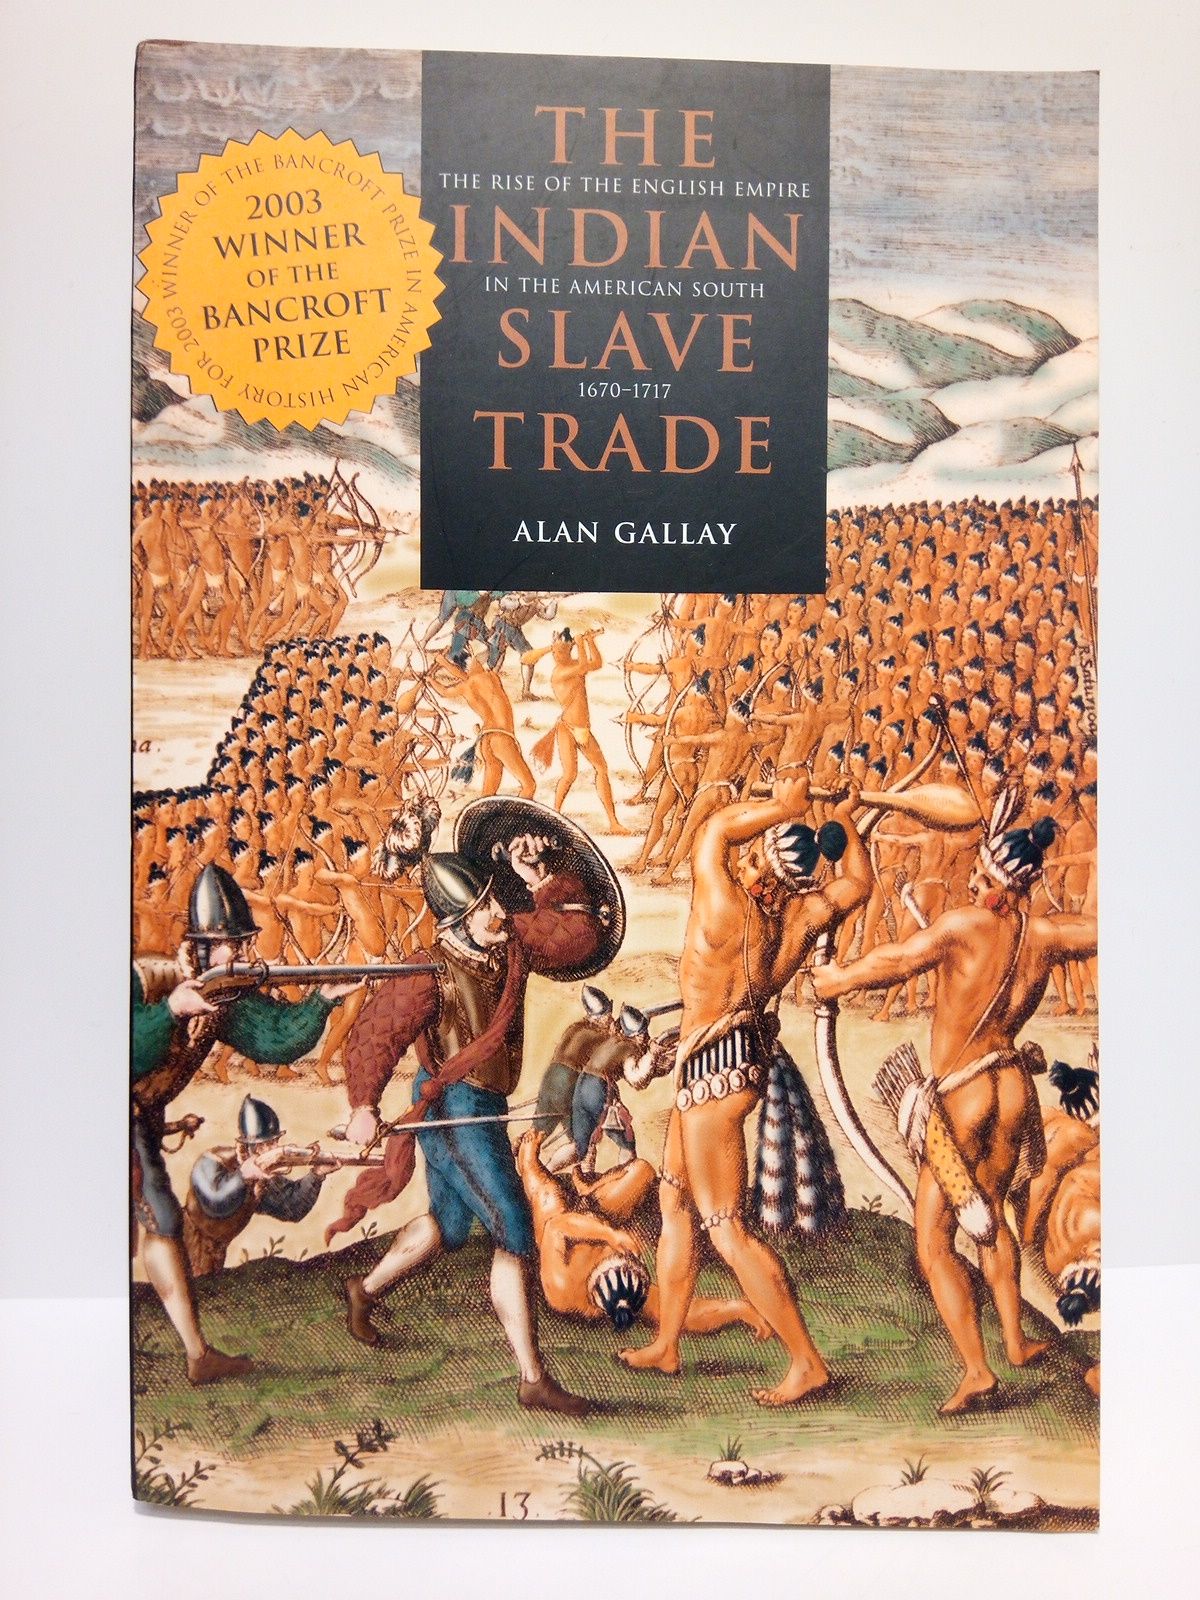 The indian slave trade: The rise of the English Empire in the American South, 1670-1717 - GALLAY, Alan